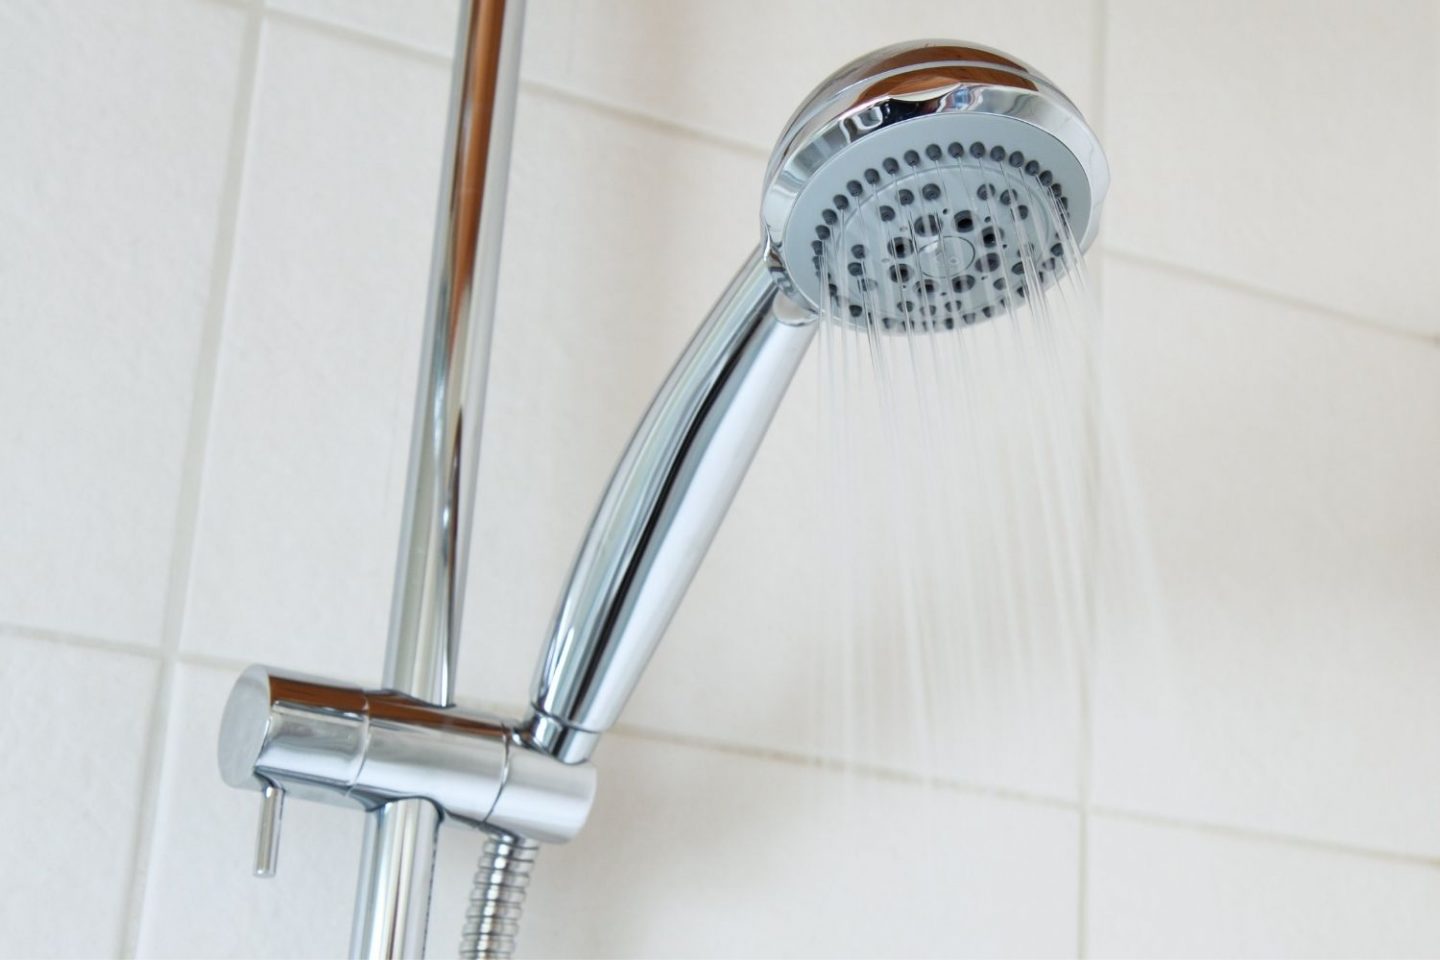 A photo of a shower, showing just the top part with the chrome shower head as it sprays water.